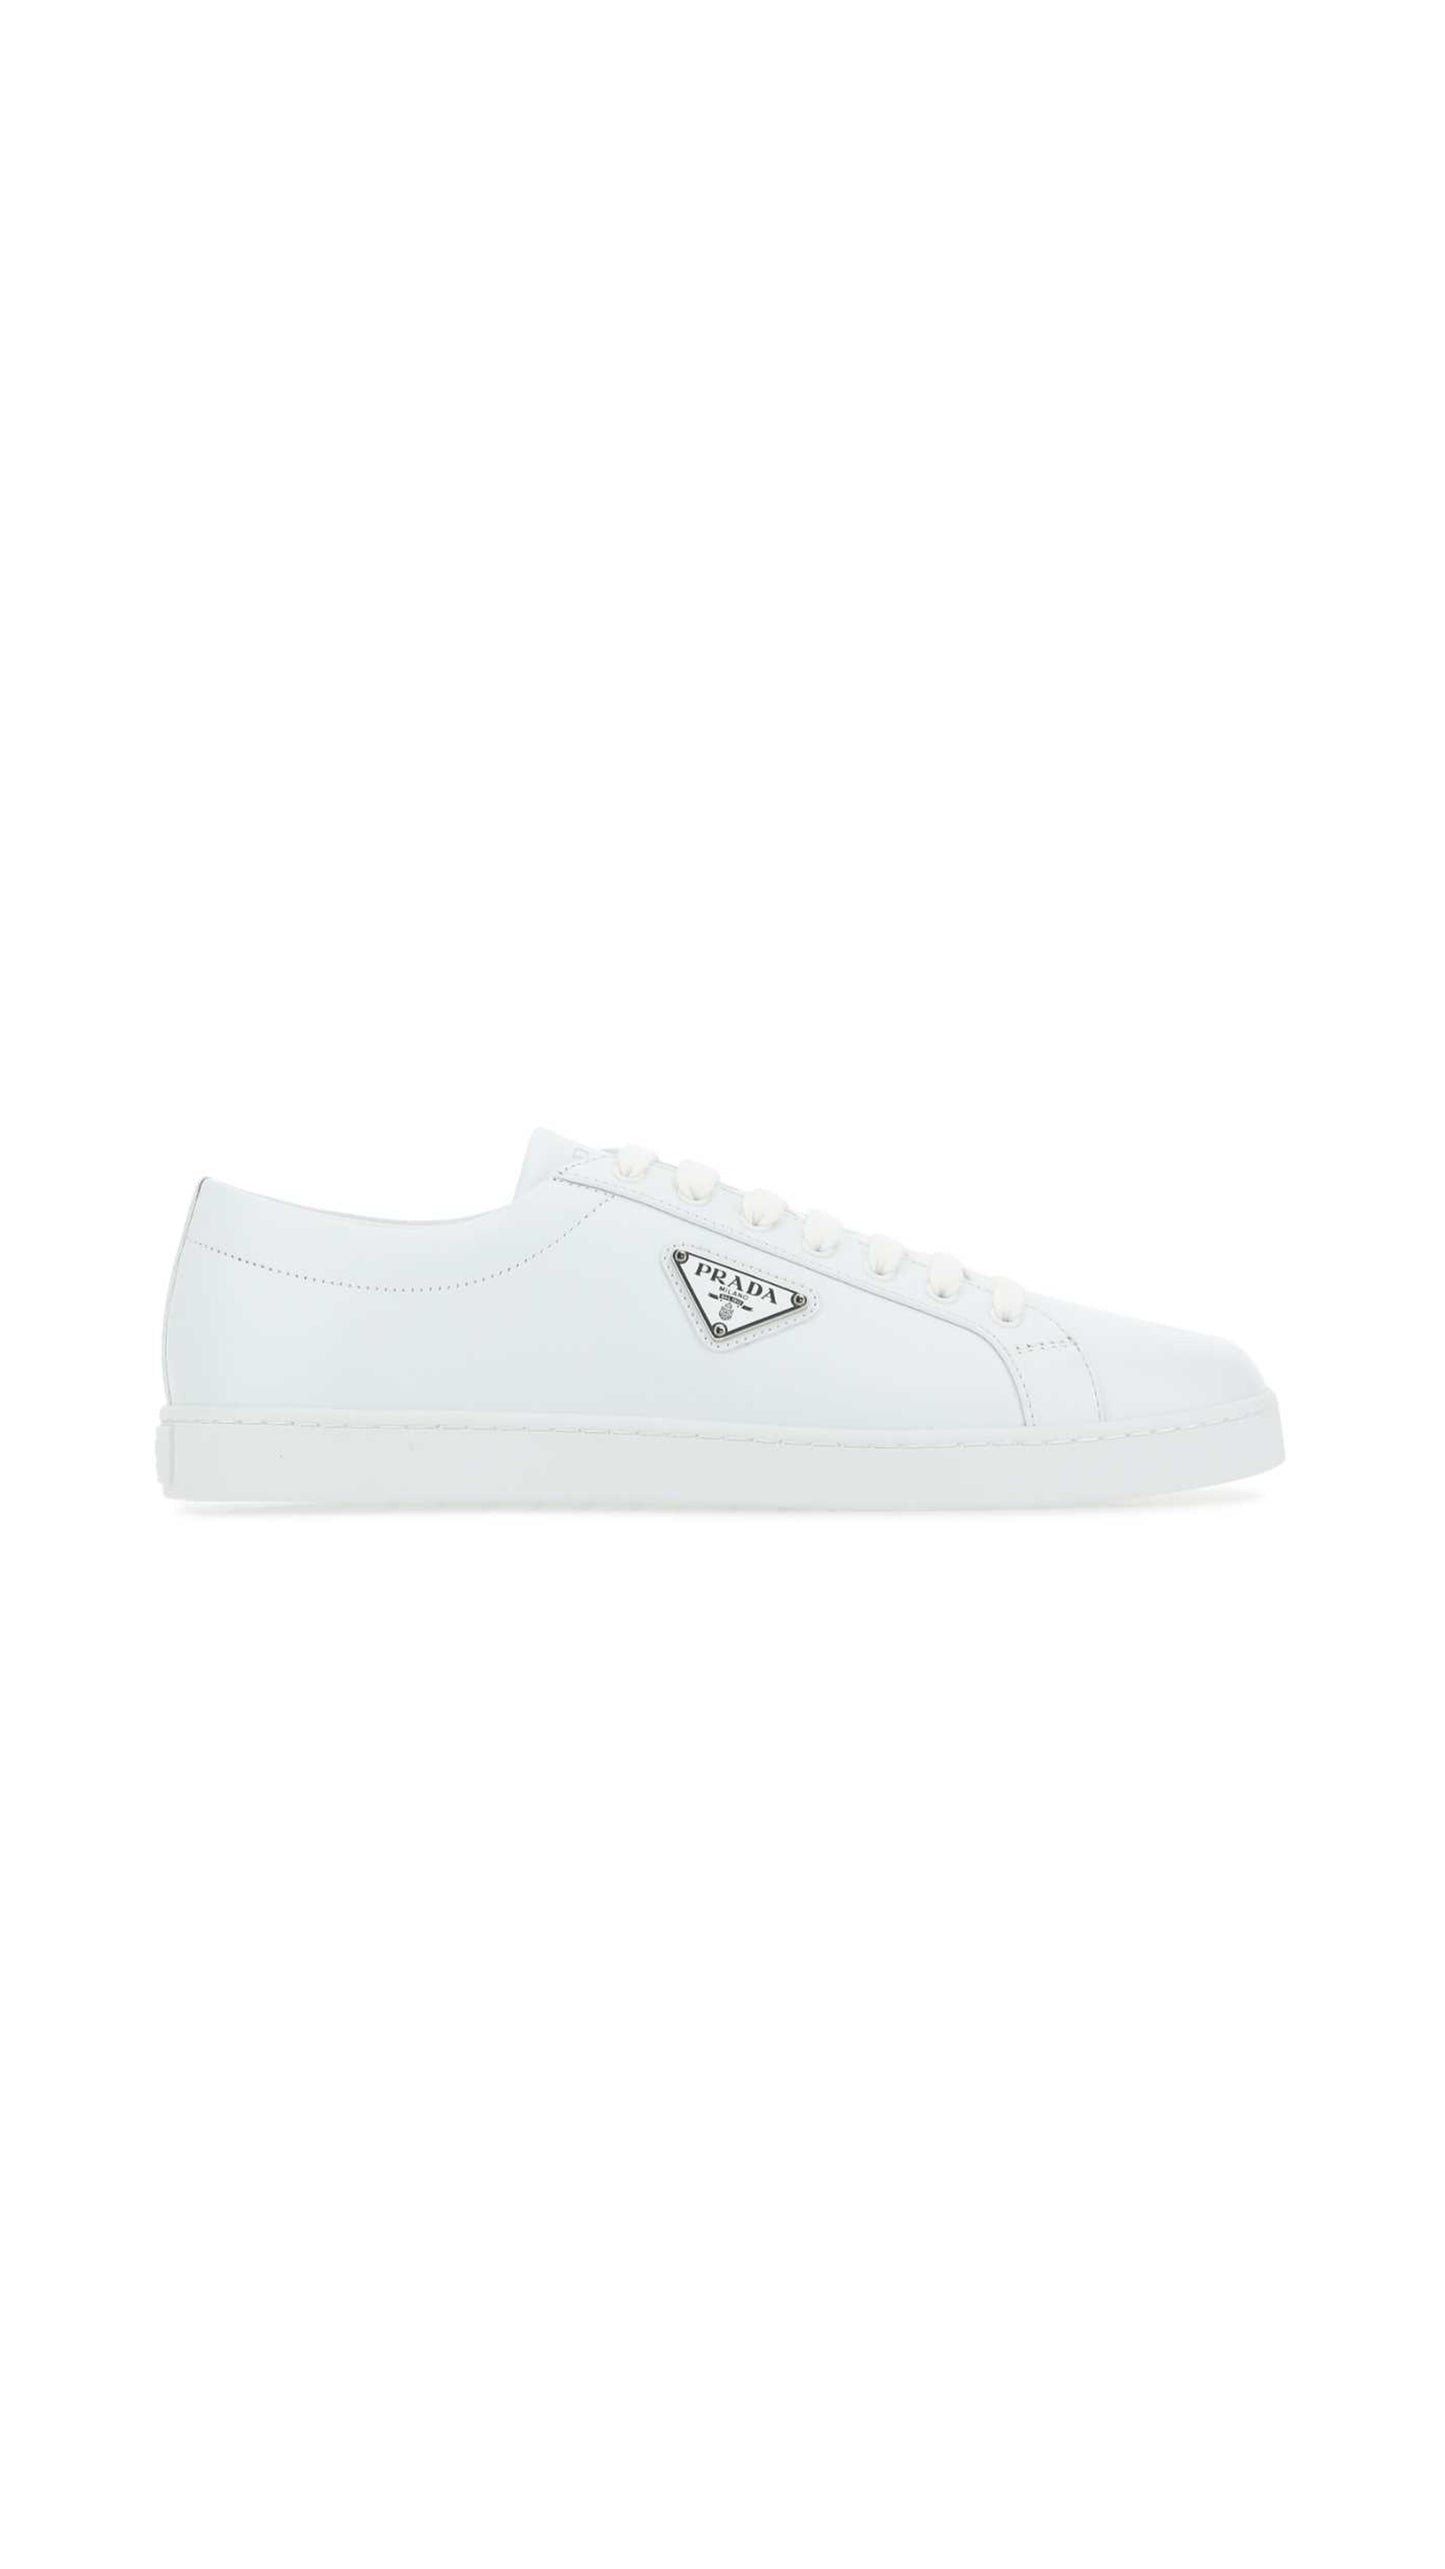 Brushed Leather Sneakers  - White